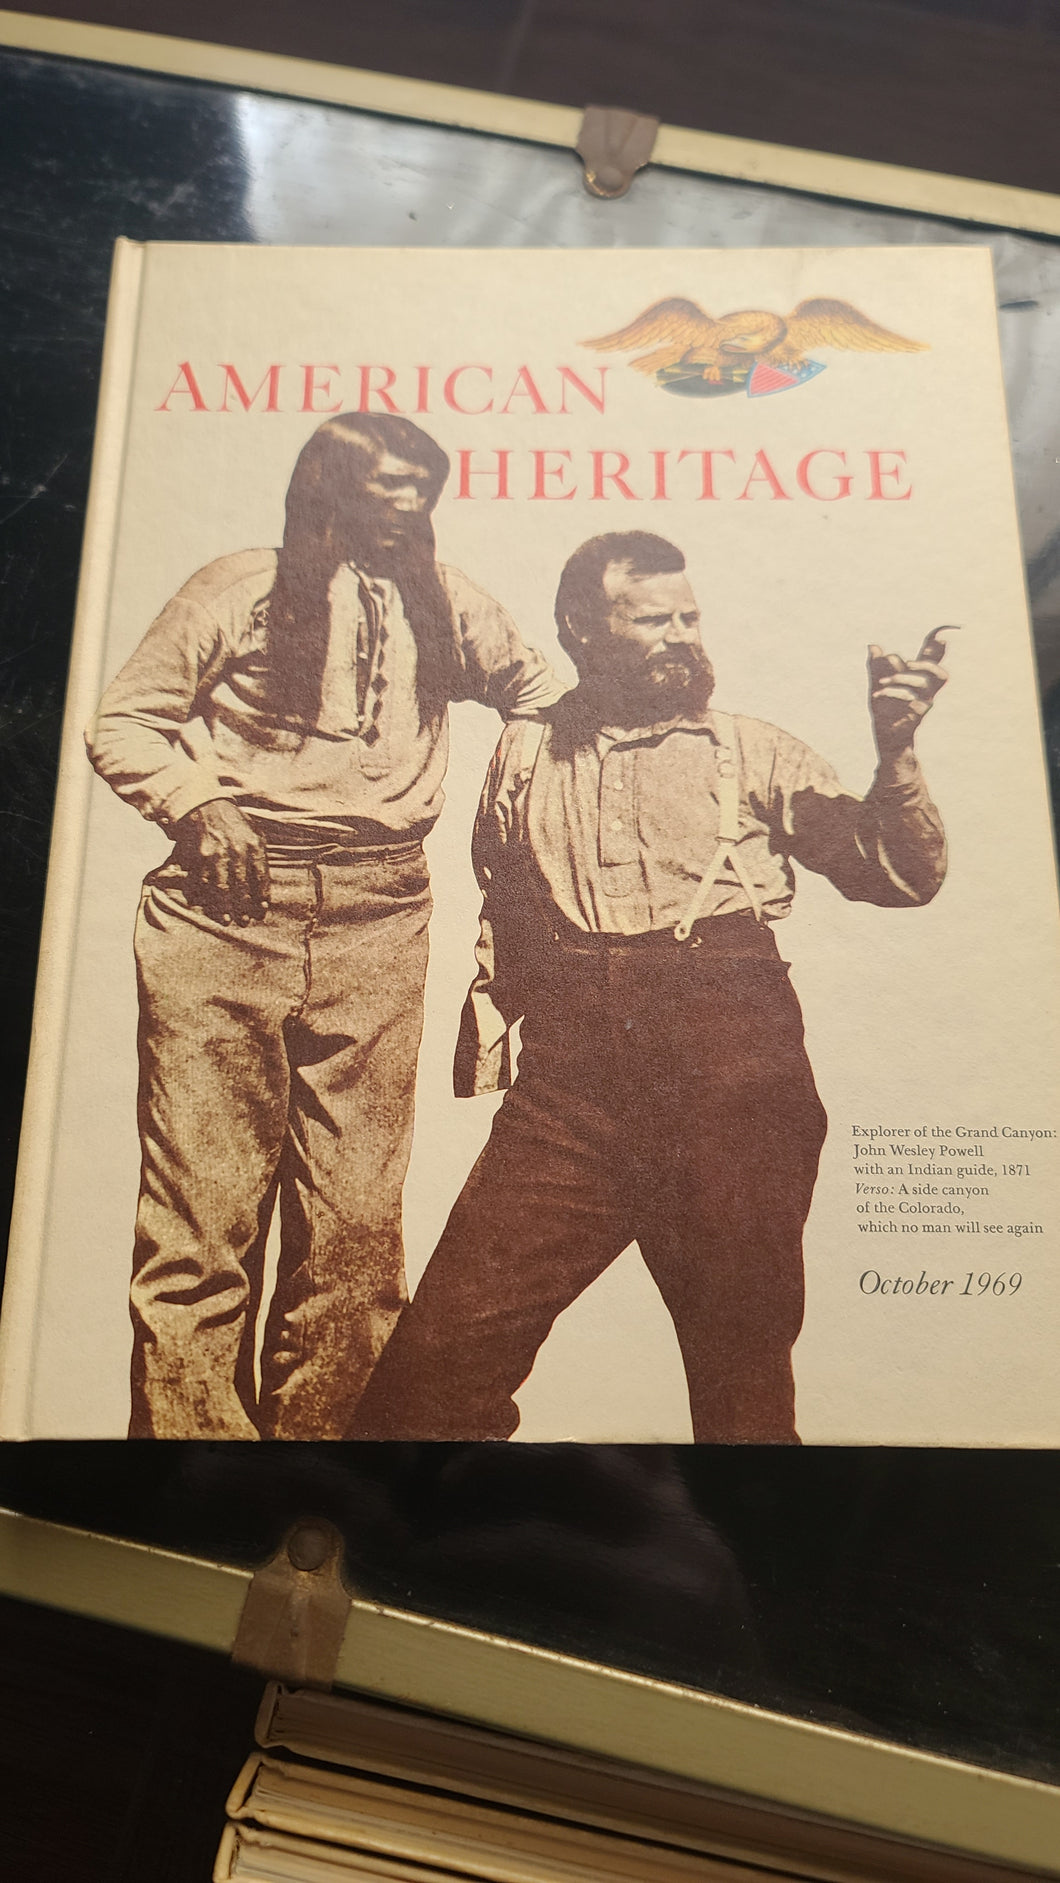 American Heritage Explorer of the Grand Canyon October 1969